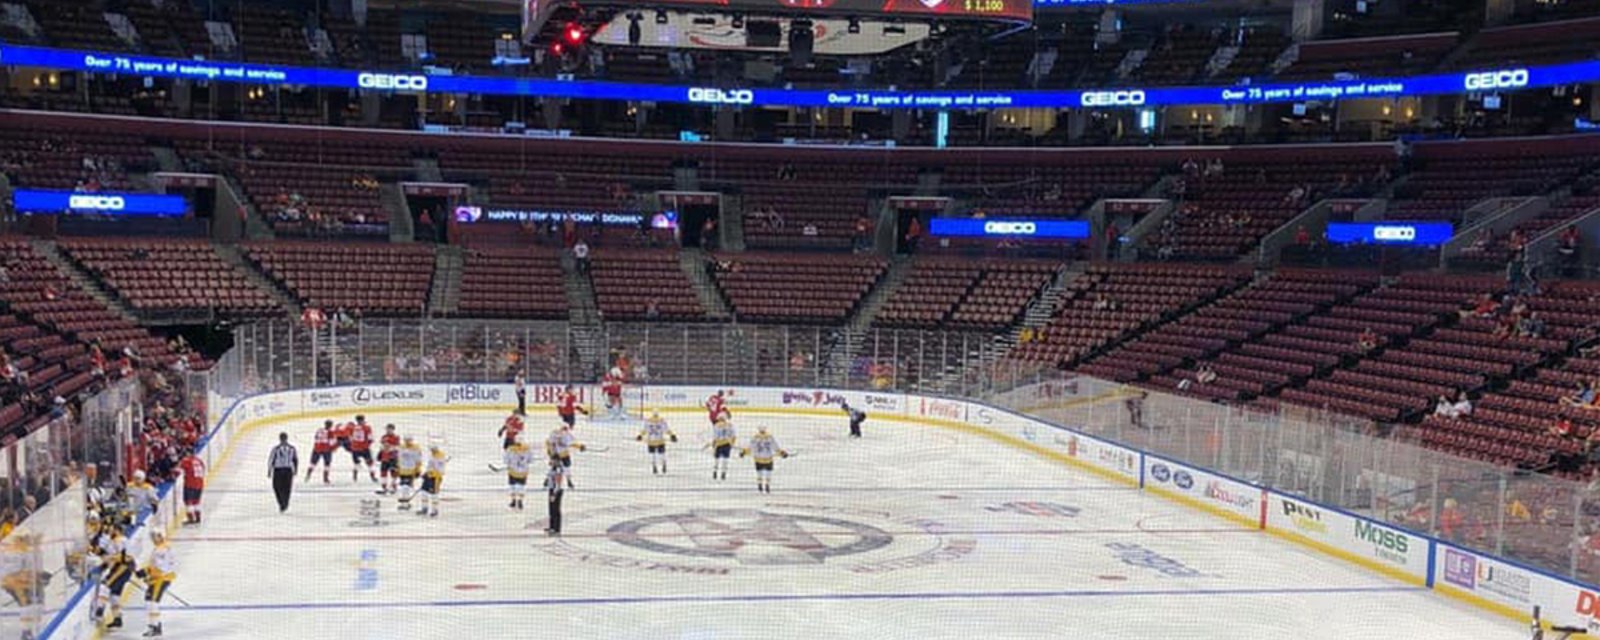 Panthers set embarrassing new low in attendance for preseason game against Preds